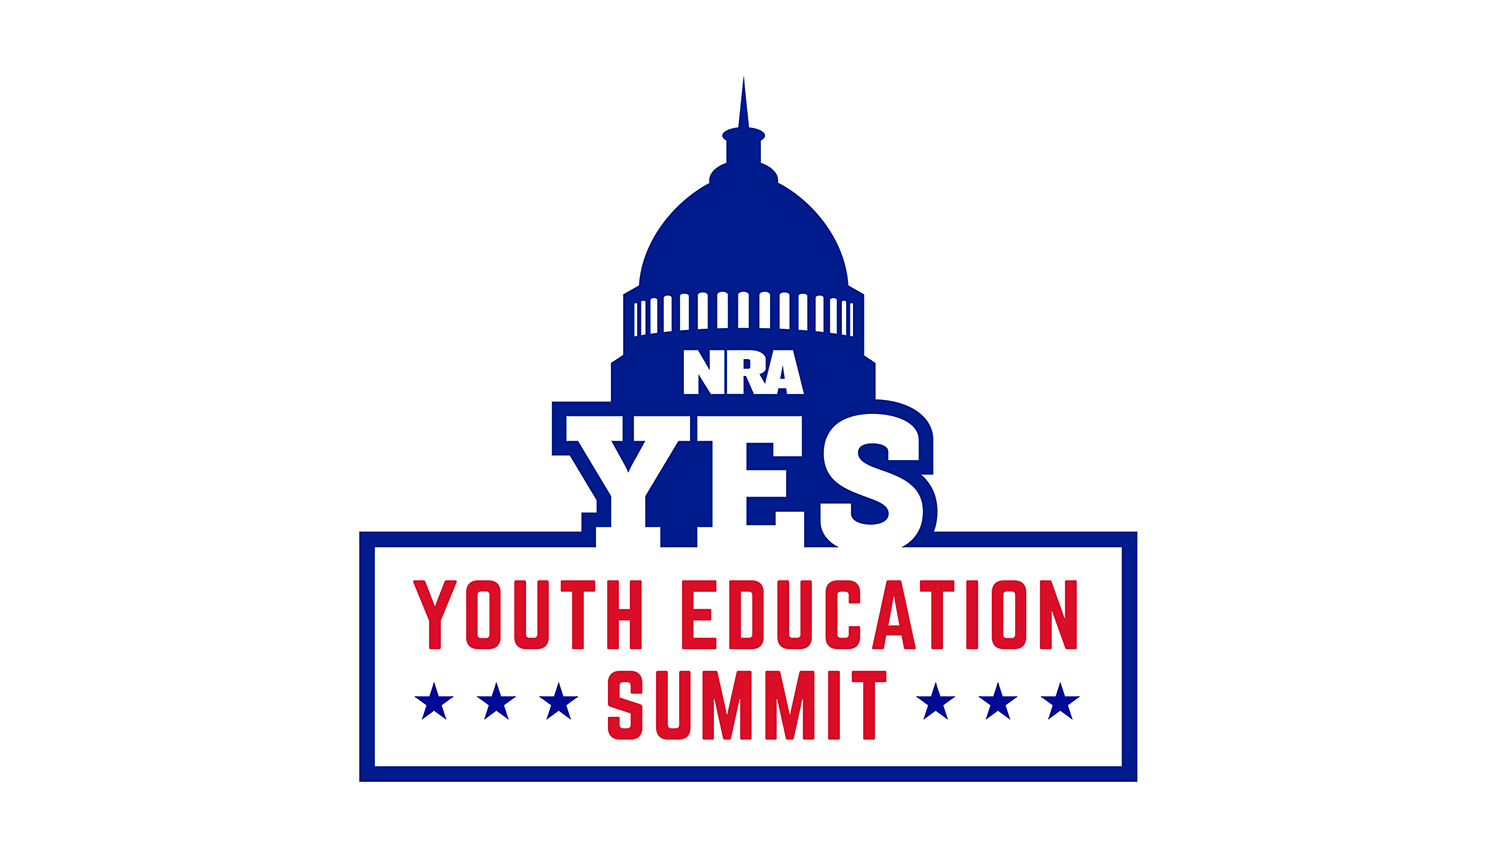 TheDailyTimes.com: Say YES to NRA youth leadership training